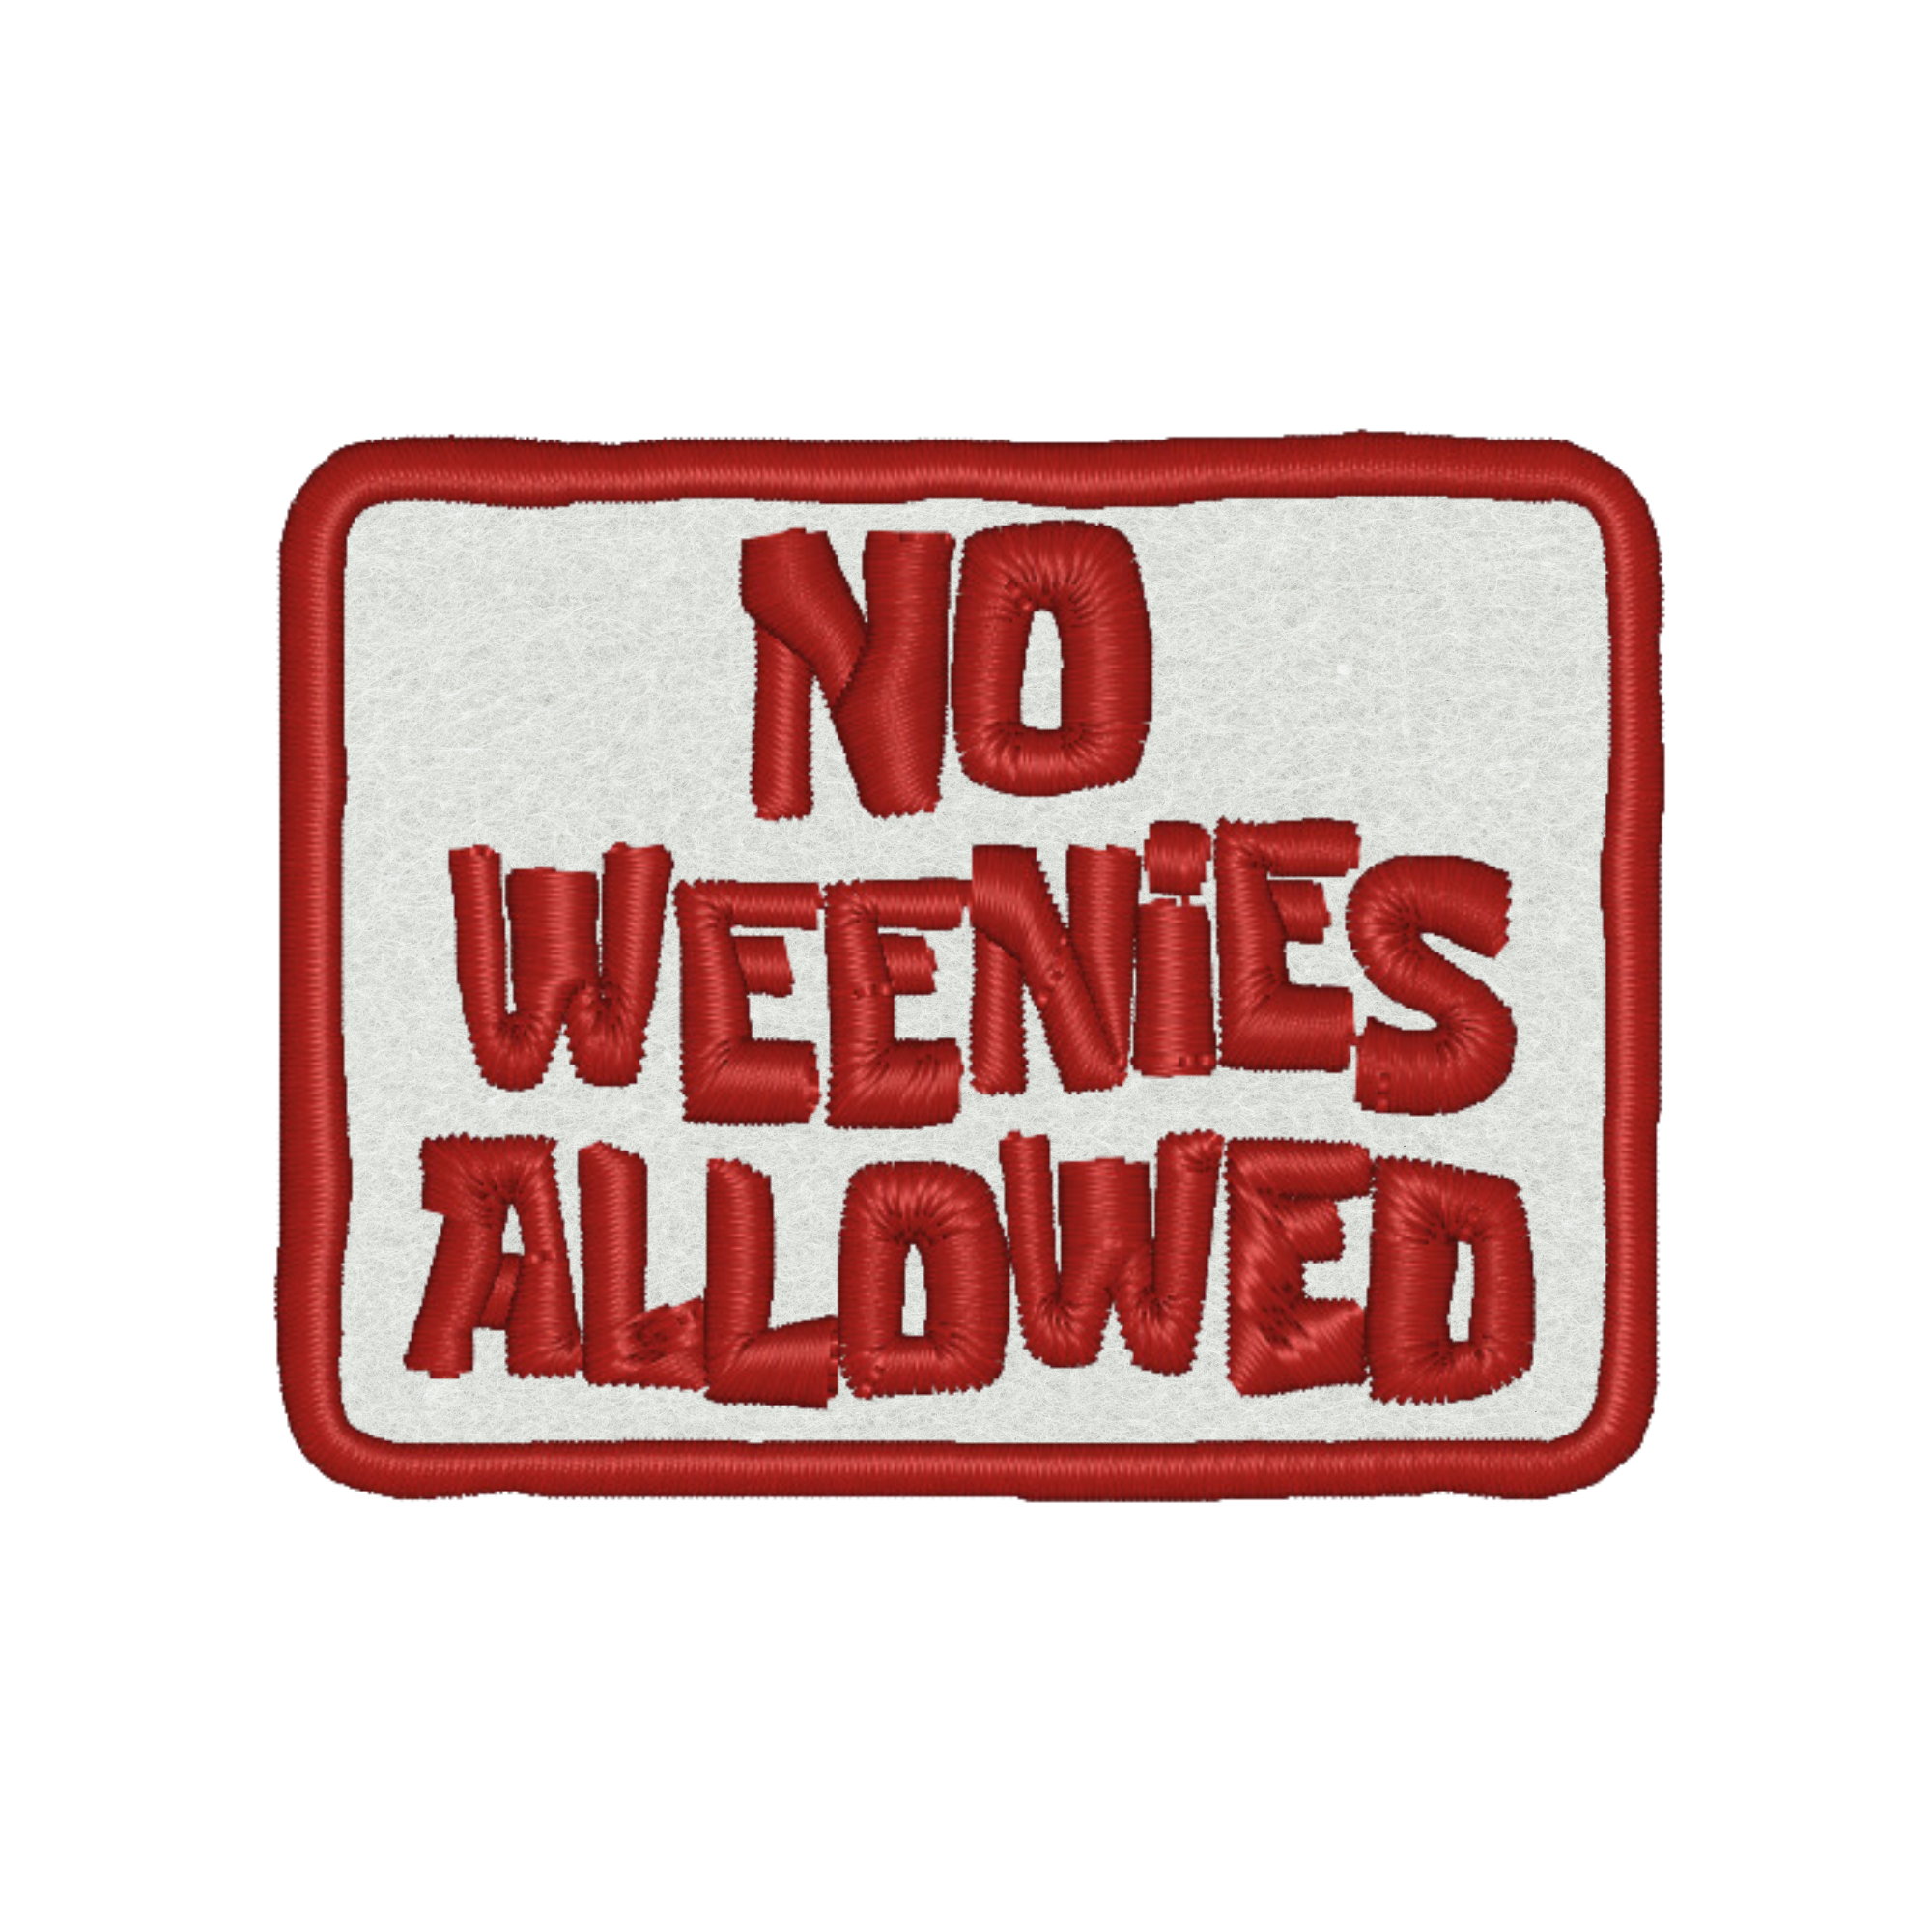 No Weenies Allowed Spongebob Embroidered Iron-on Patch